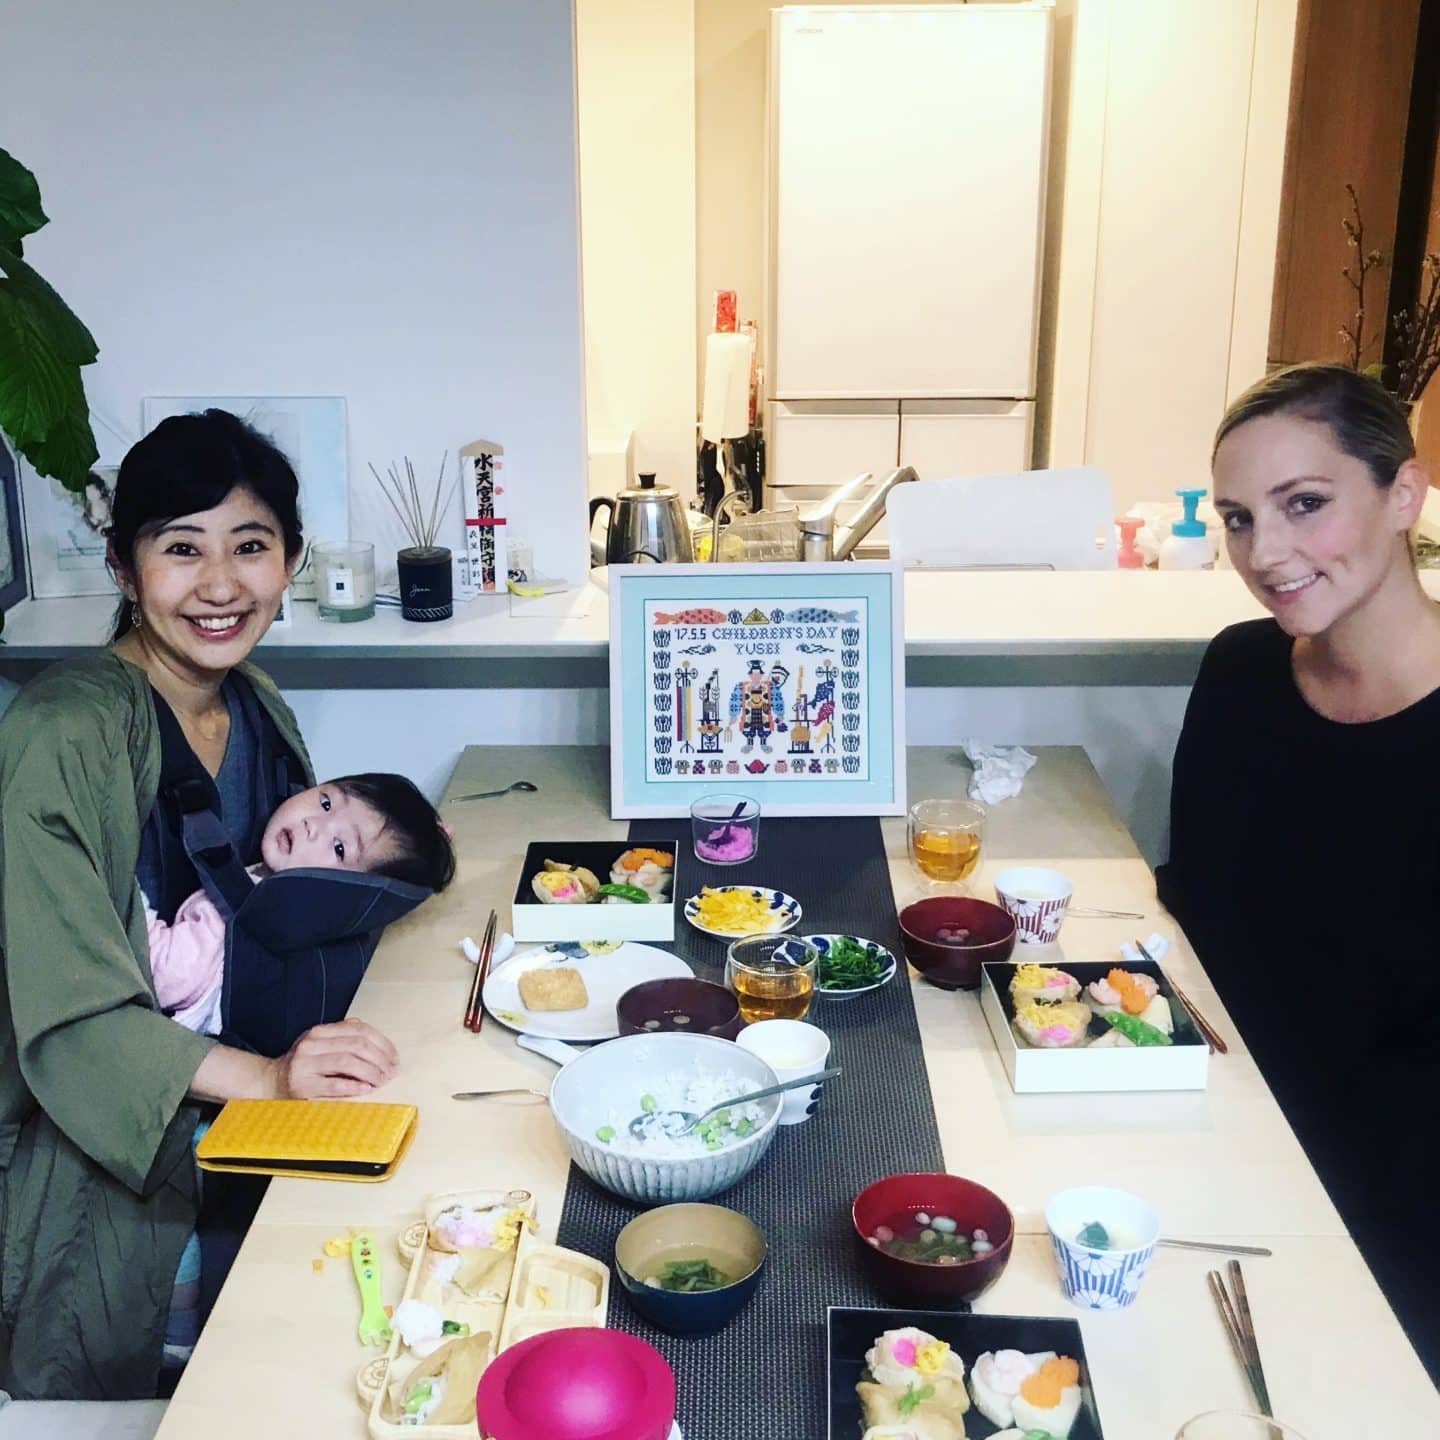 NAGOMI VISIT: A MEAL IN A JAPANESE HOME